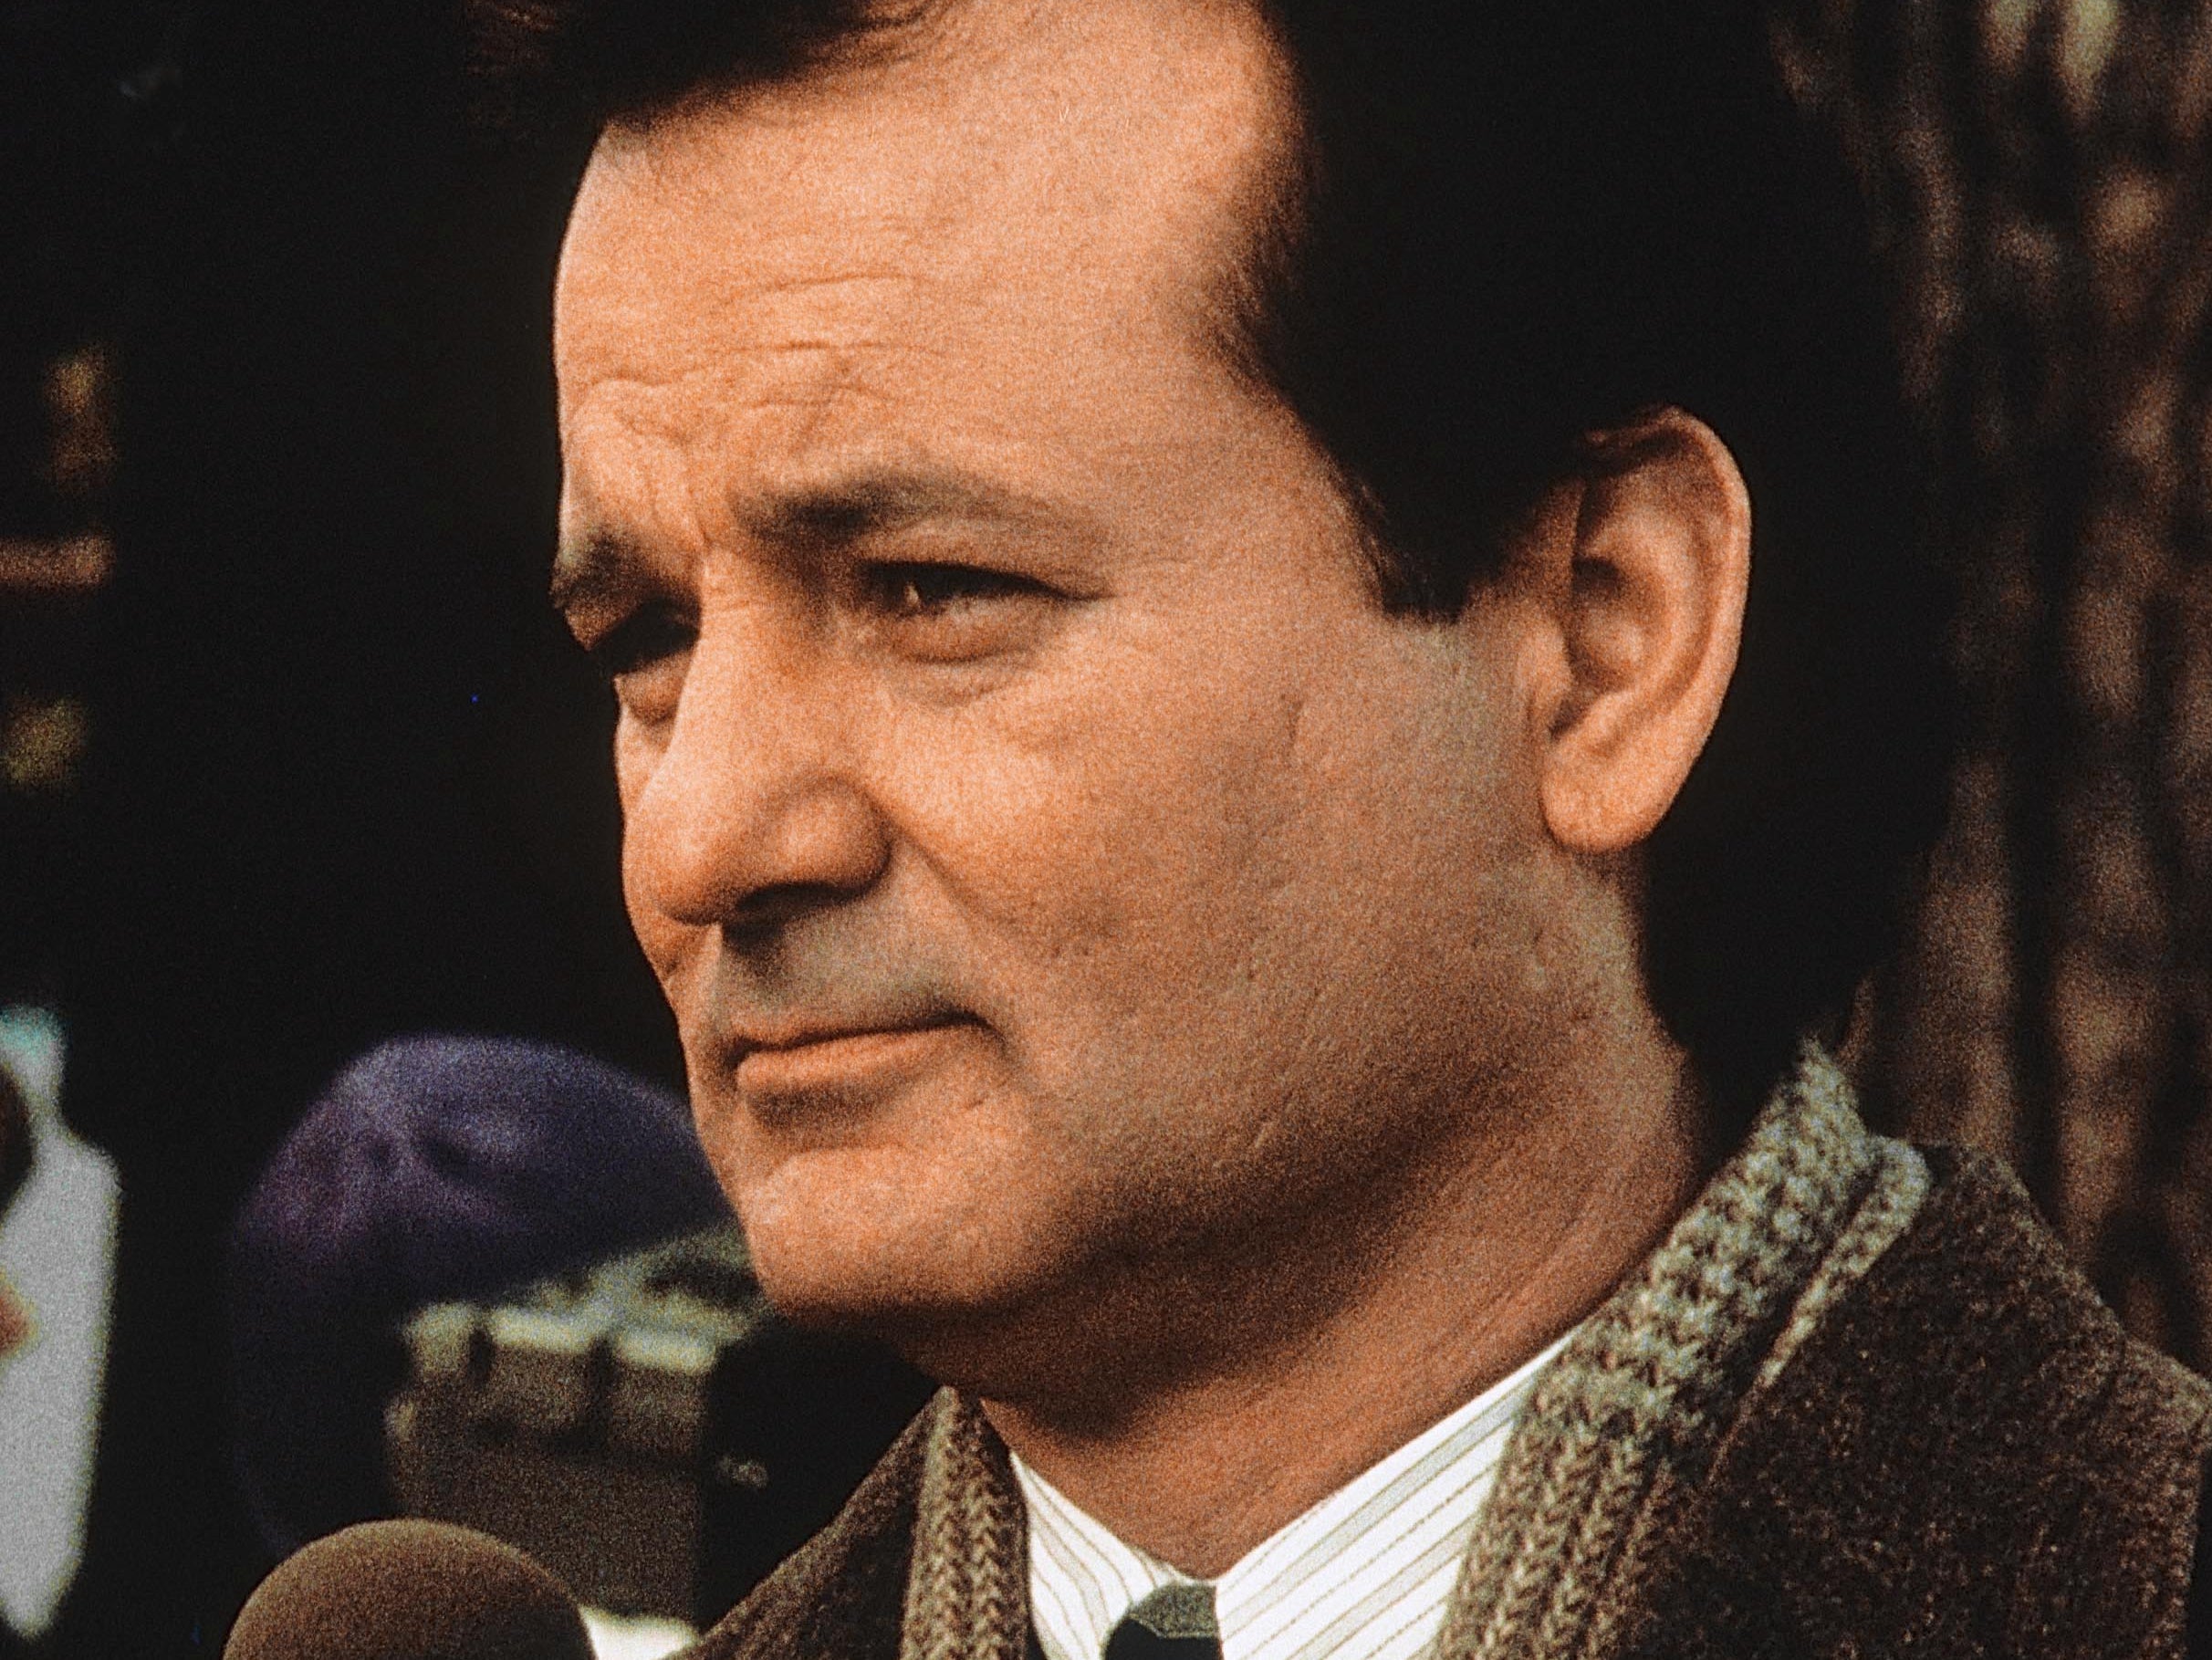 Bill Murray as curmudgeonly weatherman Phil in ‘Groundhog Day’